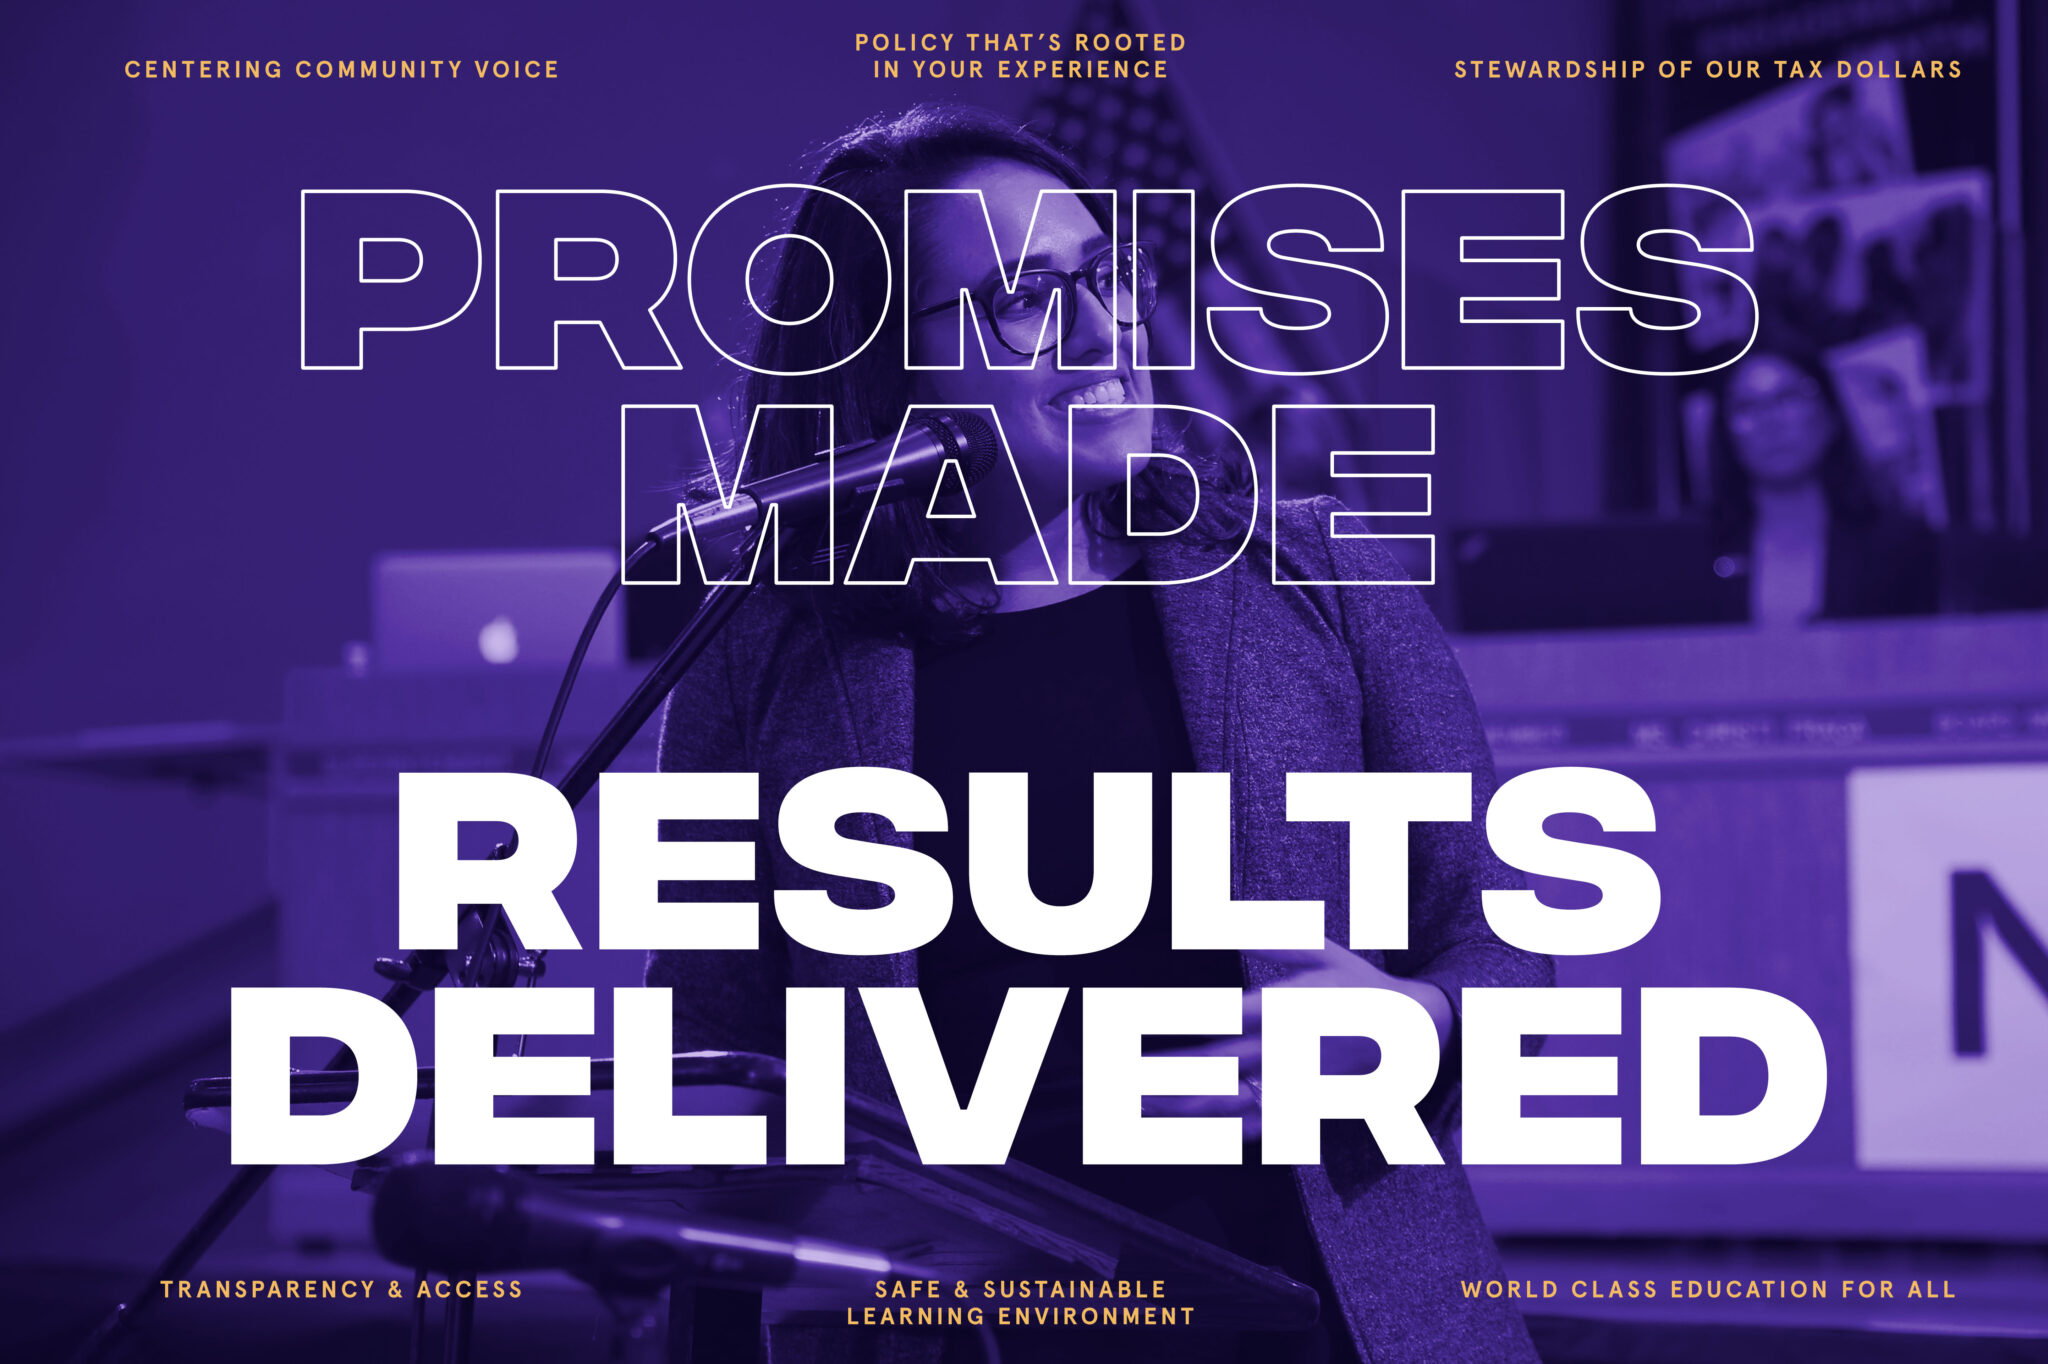 Promises Made Results Delivered Centering Community Voice Policy that's rooted in your experience Stewardship of our tax dollars Transparency and Access Safe and Sustainable learning environment World Class Education for All